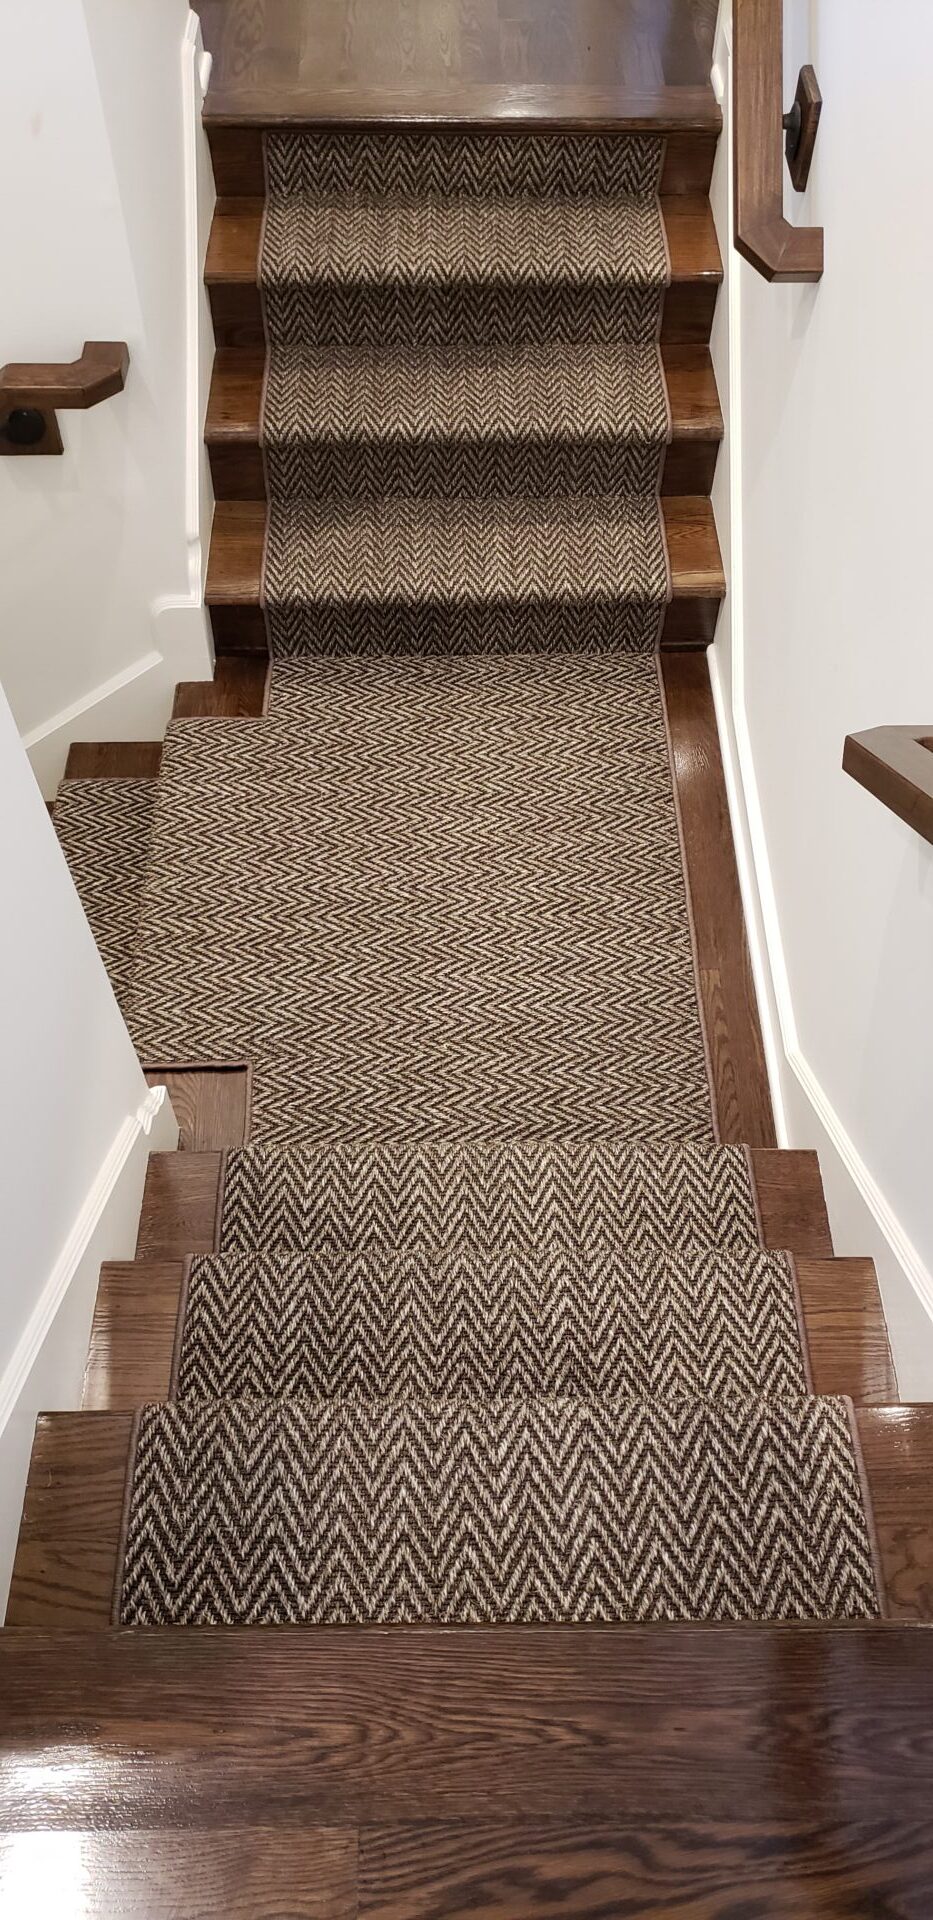 A carpet stair runner with wood trim on the bottom.